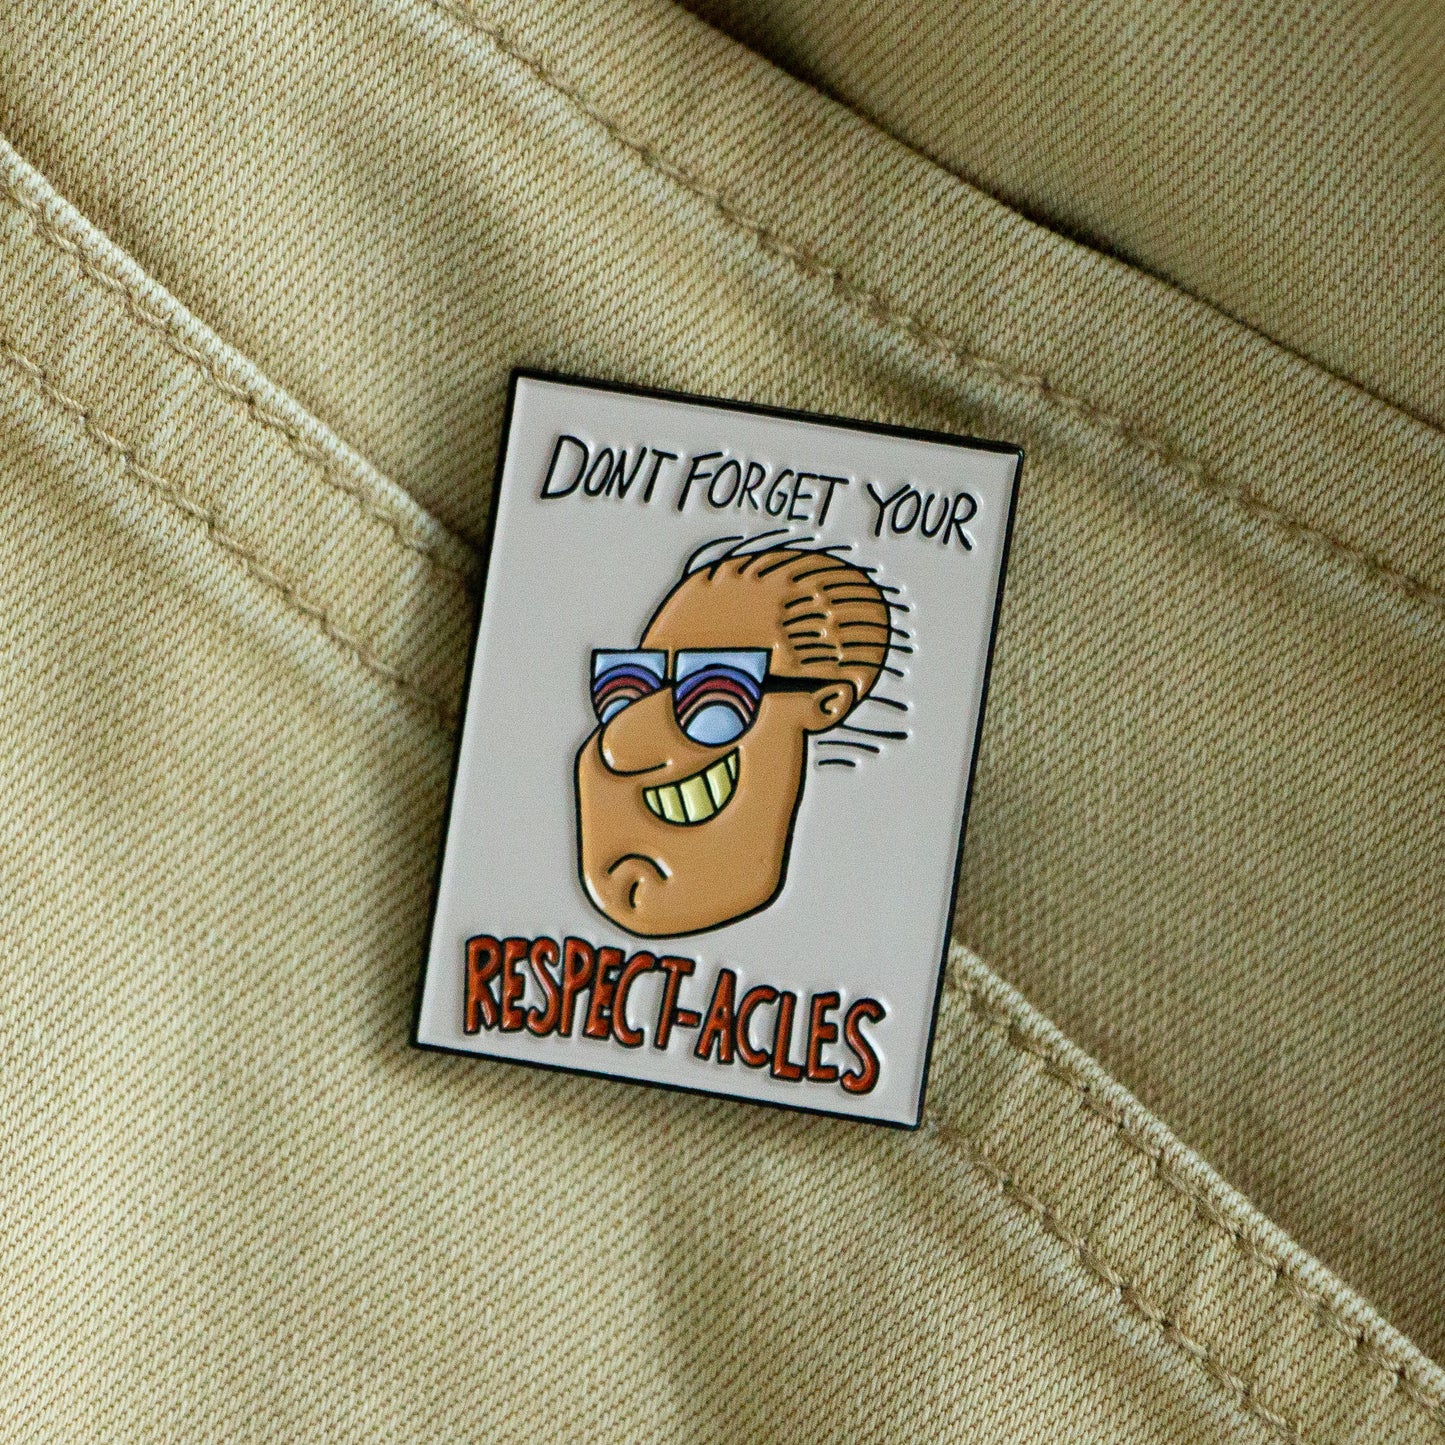 Respect-acles Poster Soft Enamel Pin